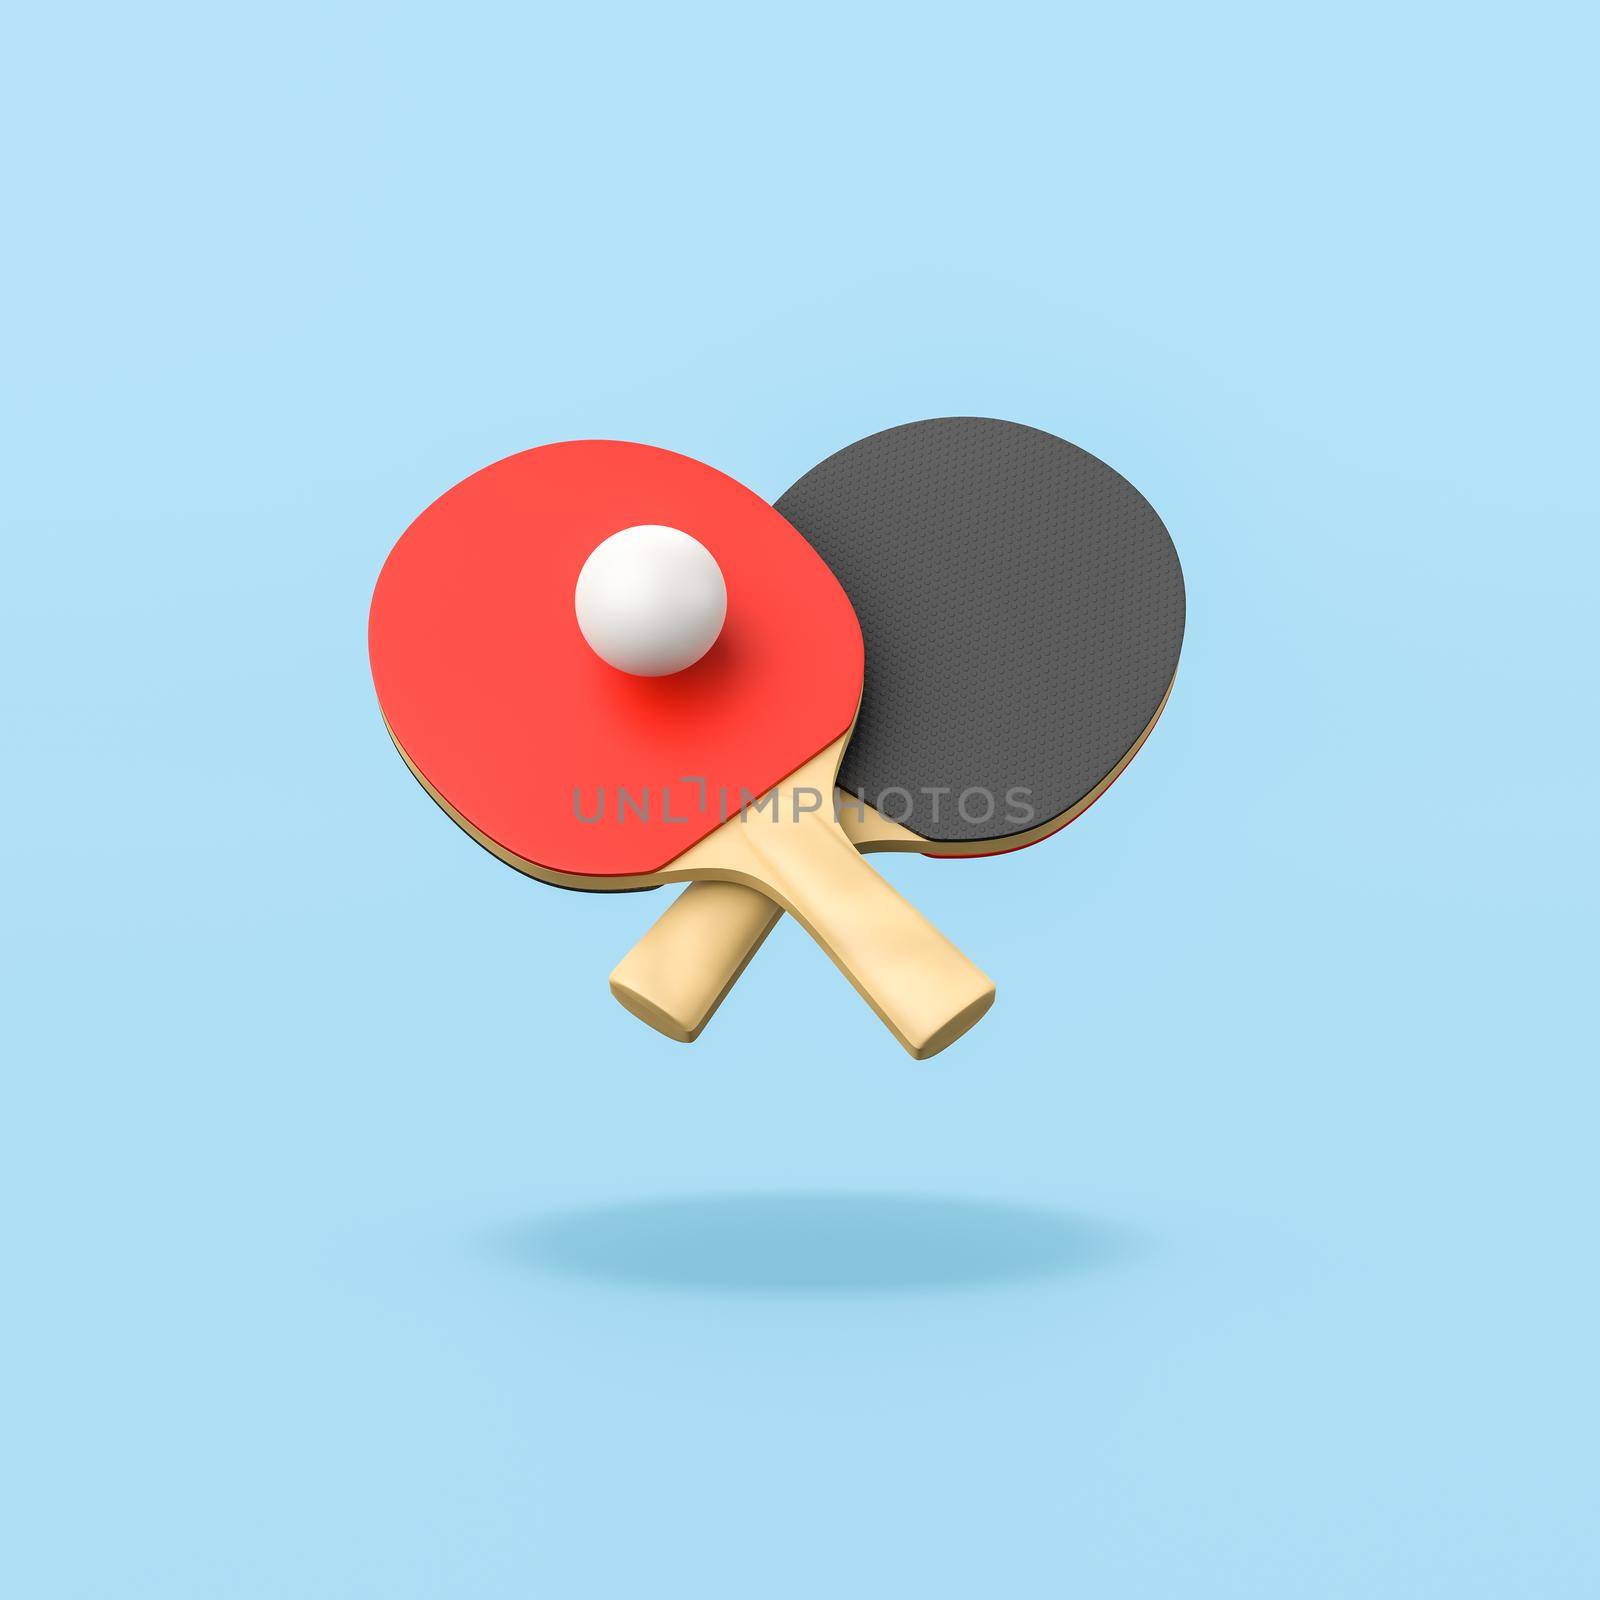 Two Ping-Pong Bats and One Ball Isolated on Flat Blue Background with Shadow 3D Illustration